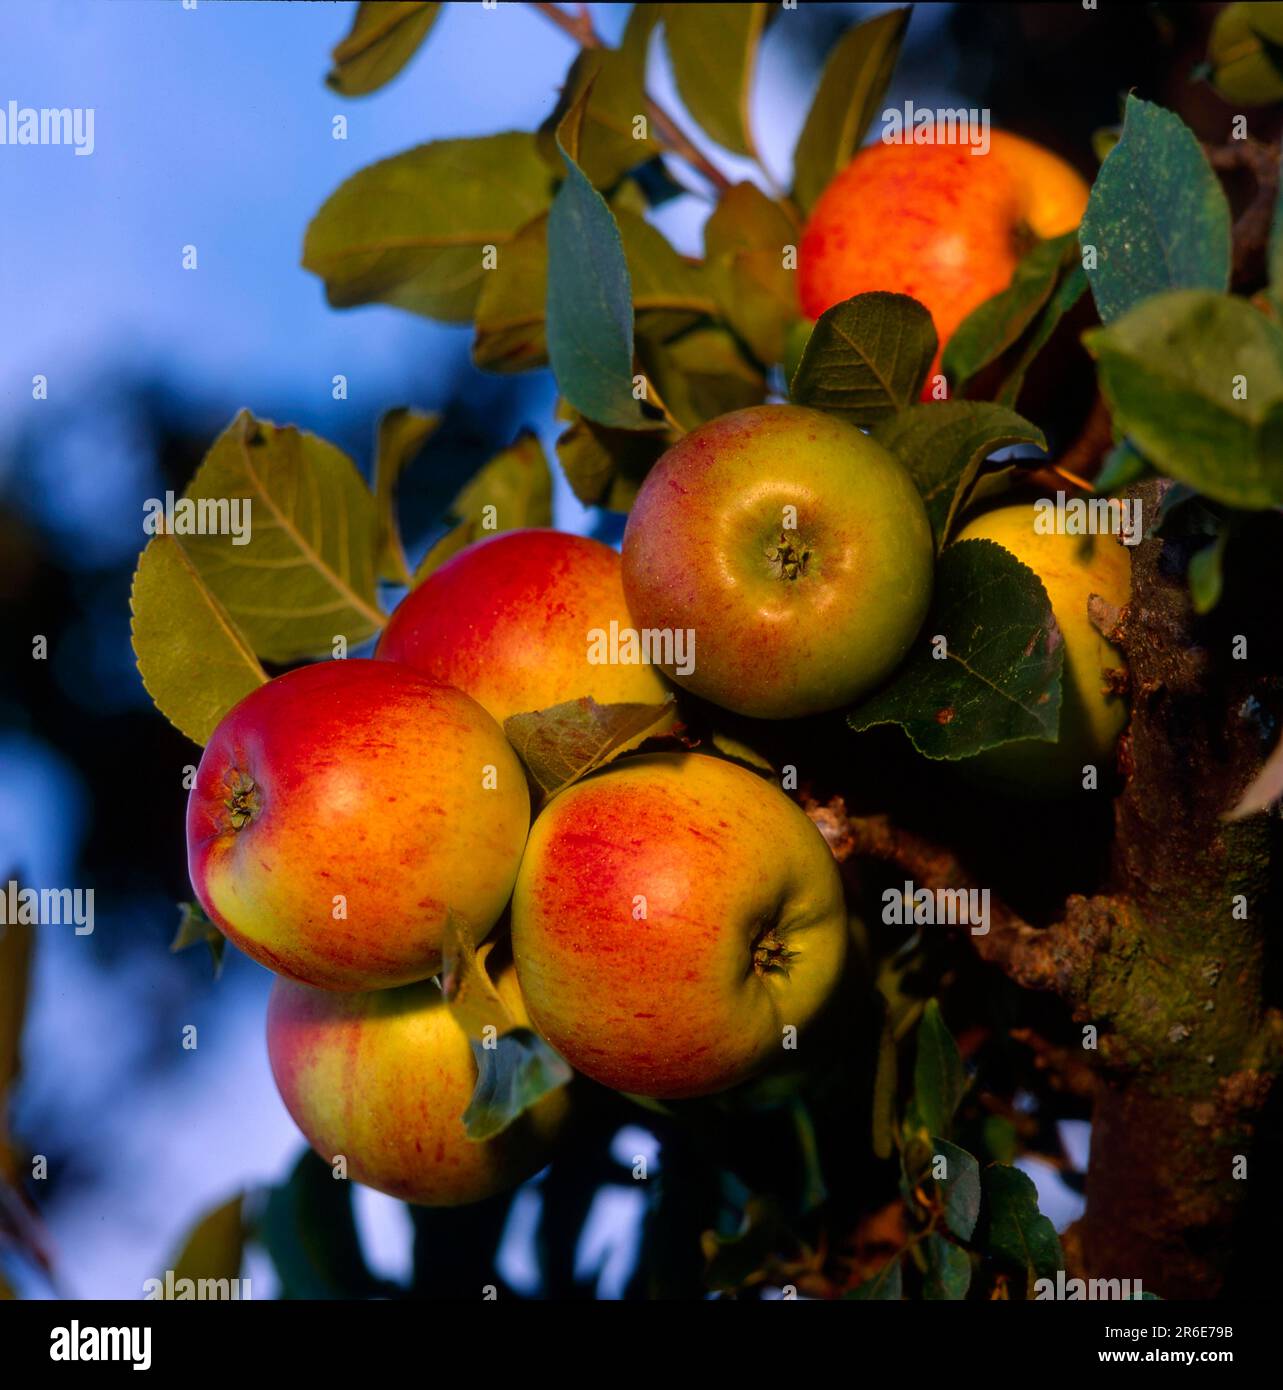 Gold Parmaene Ripe apples on the tree Stock Photo